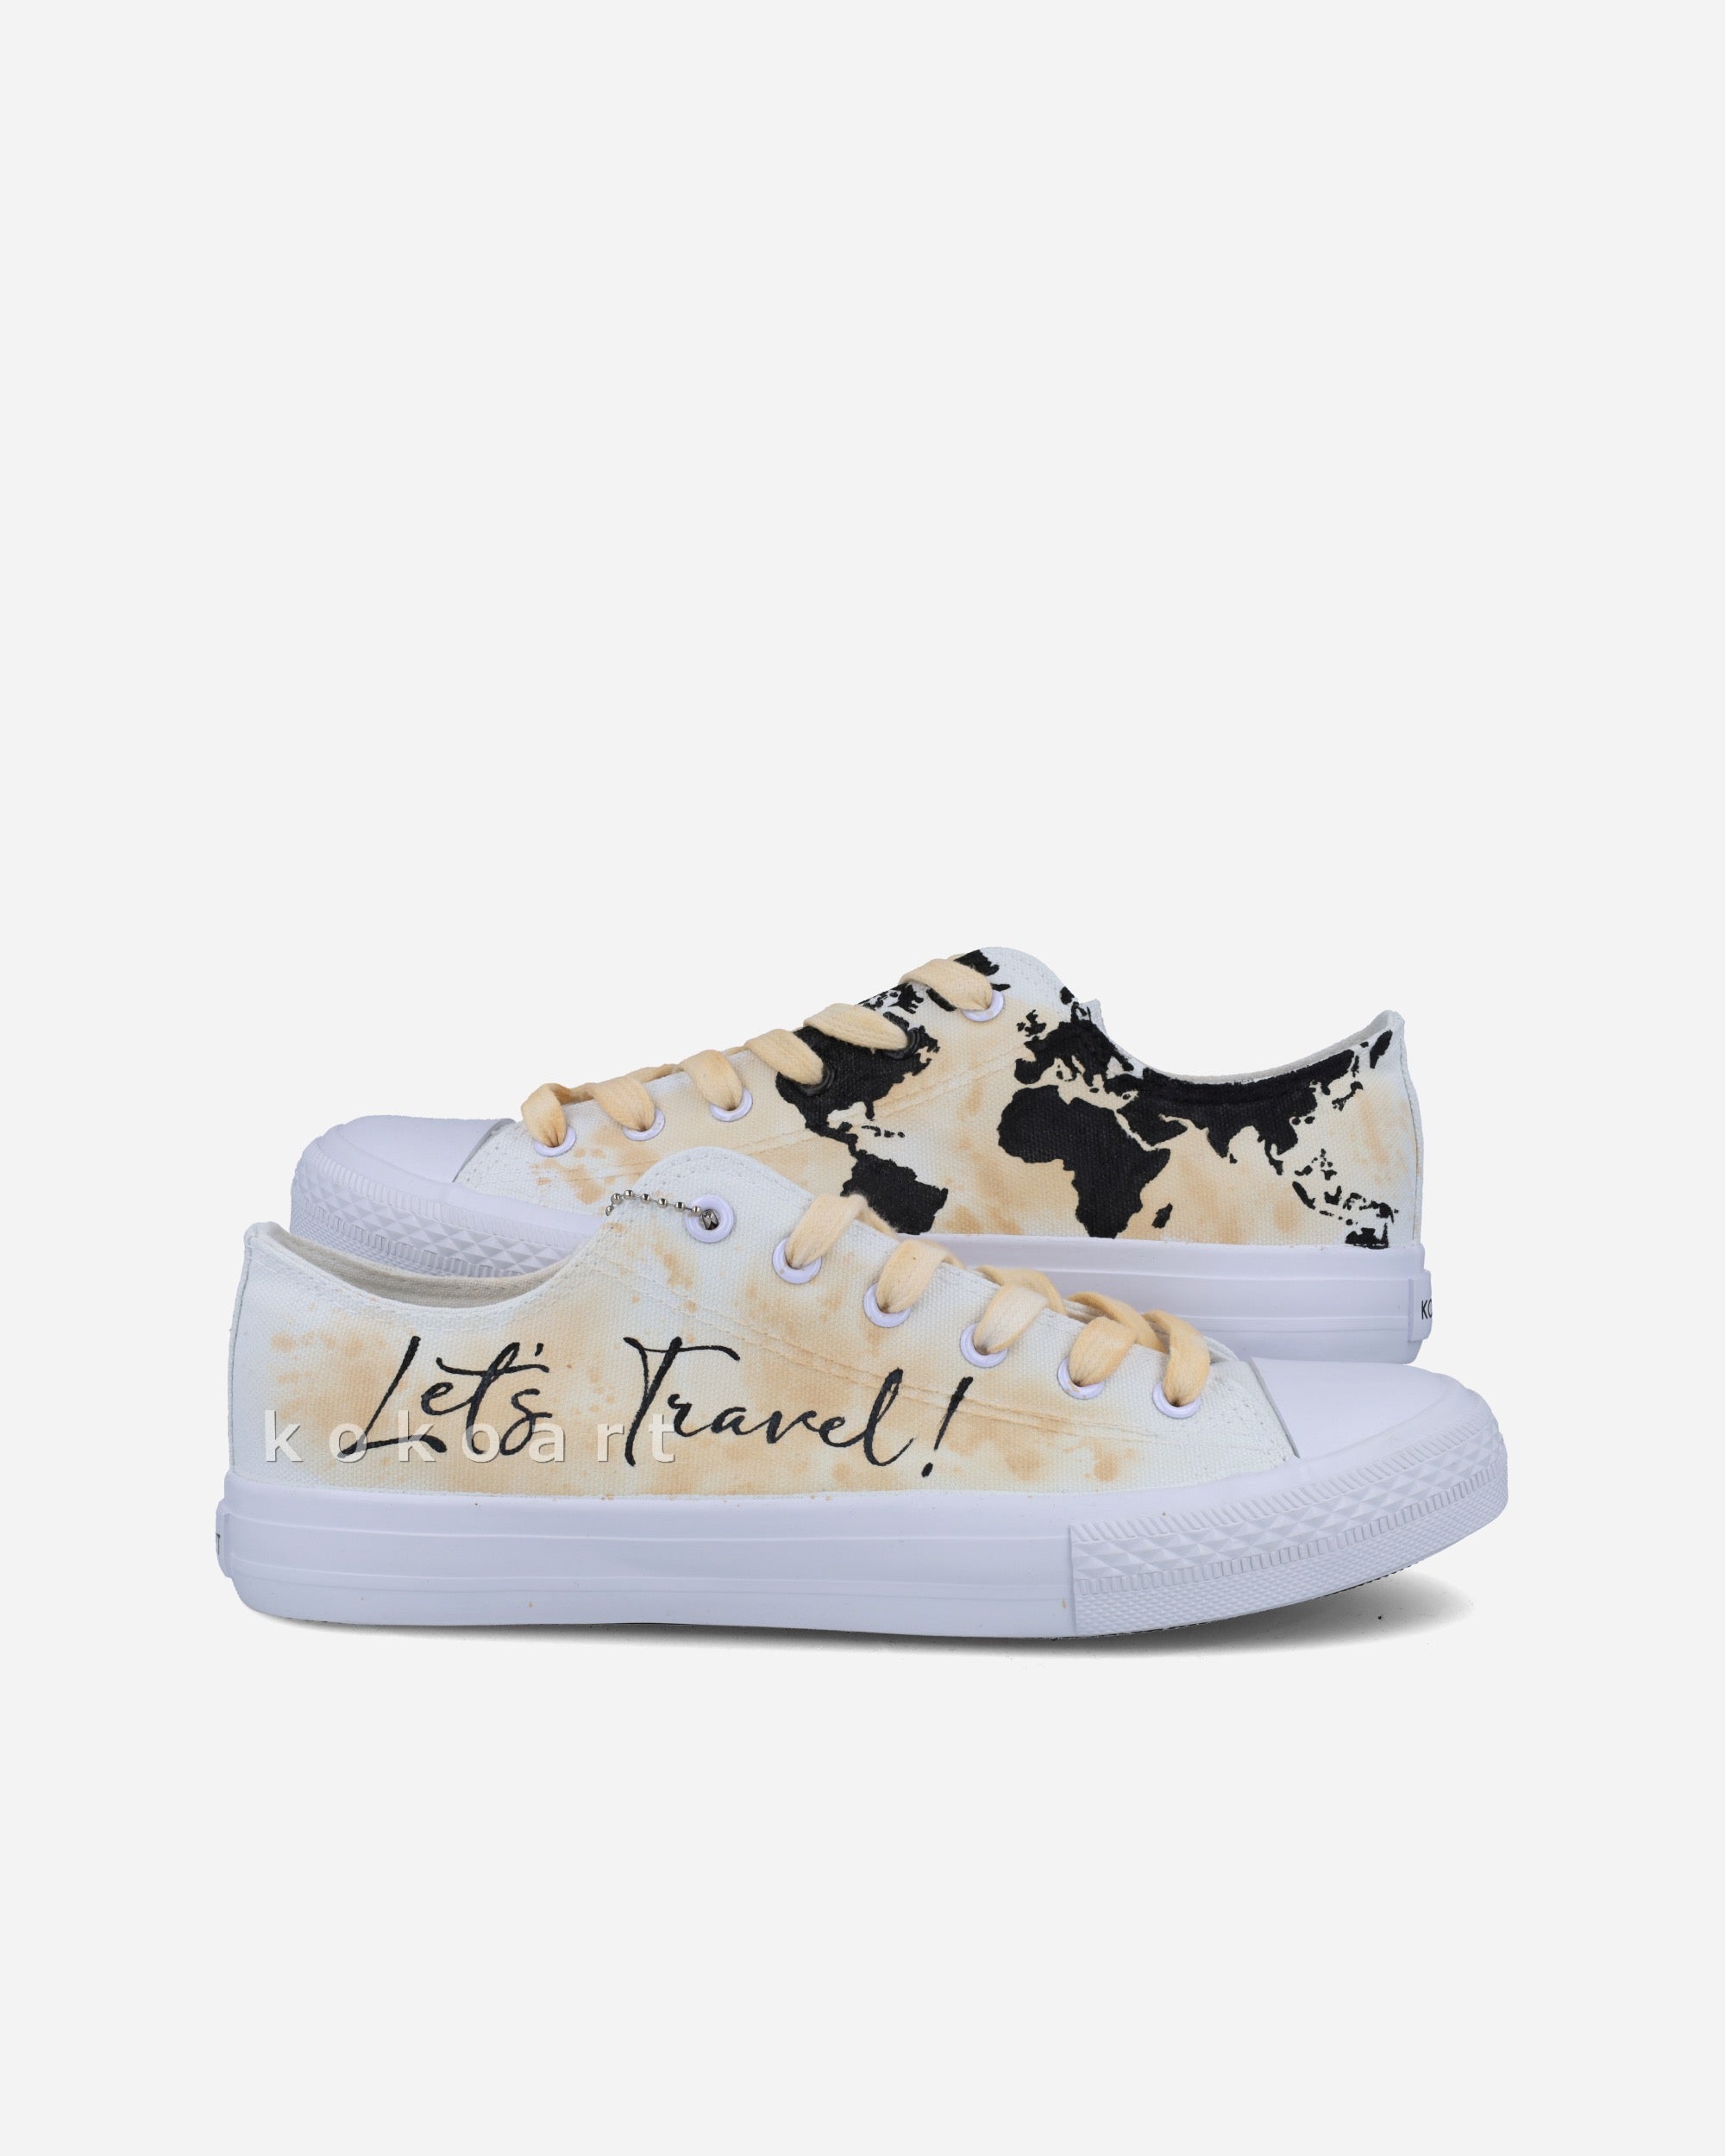 Let's Travel Hand Painted Shoes